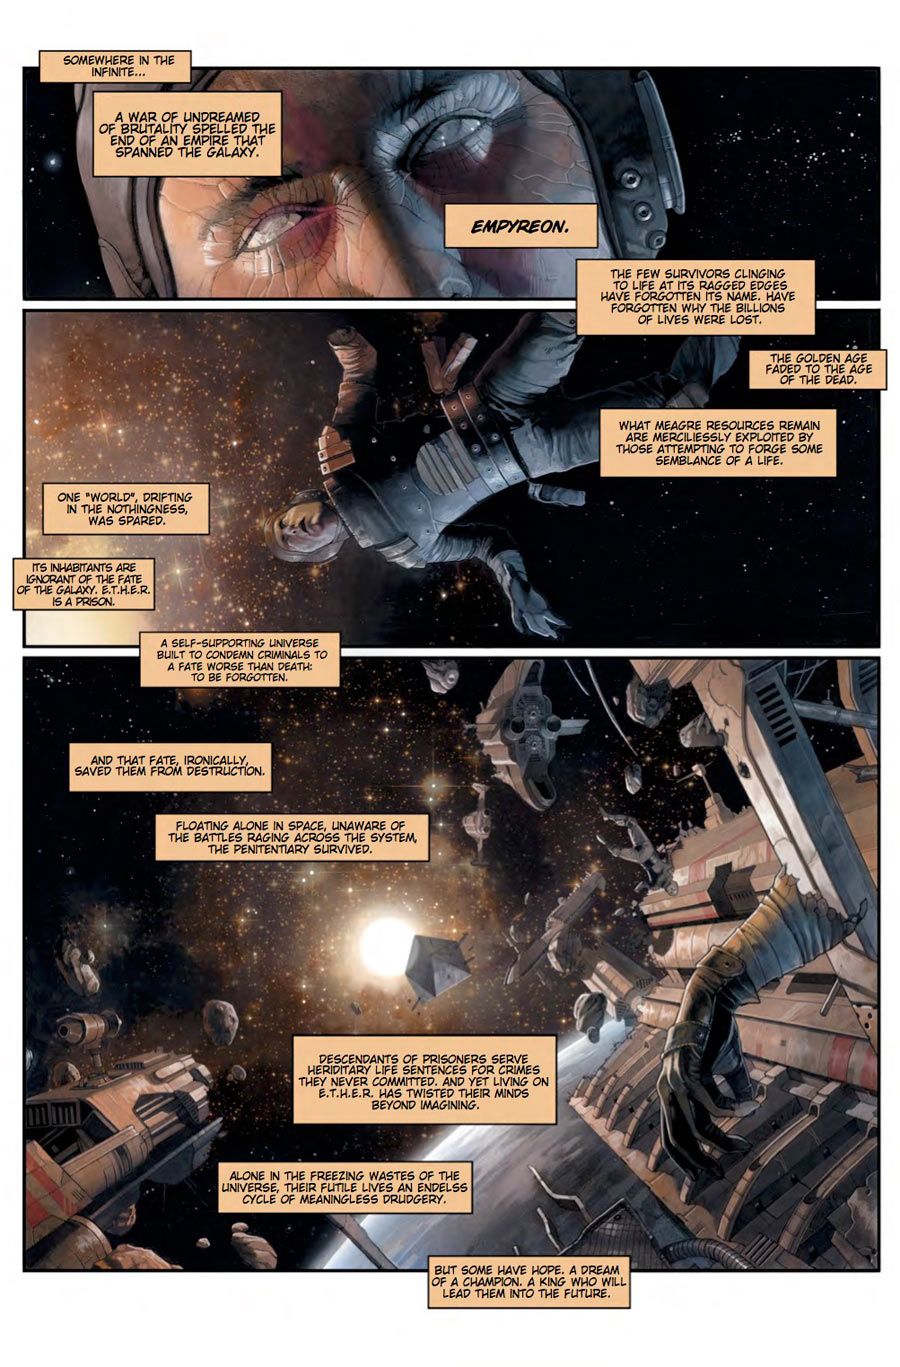 khaal_01_page-1